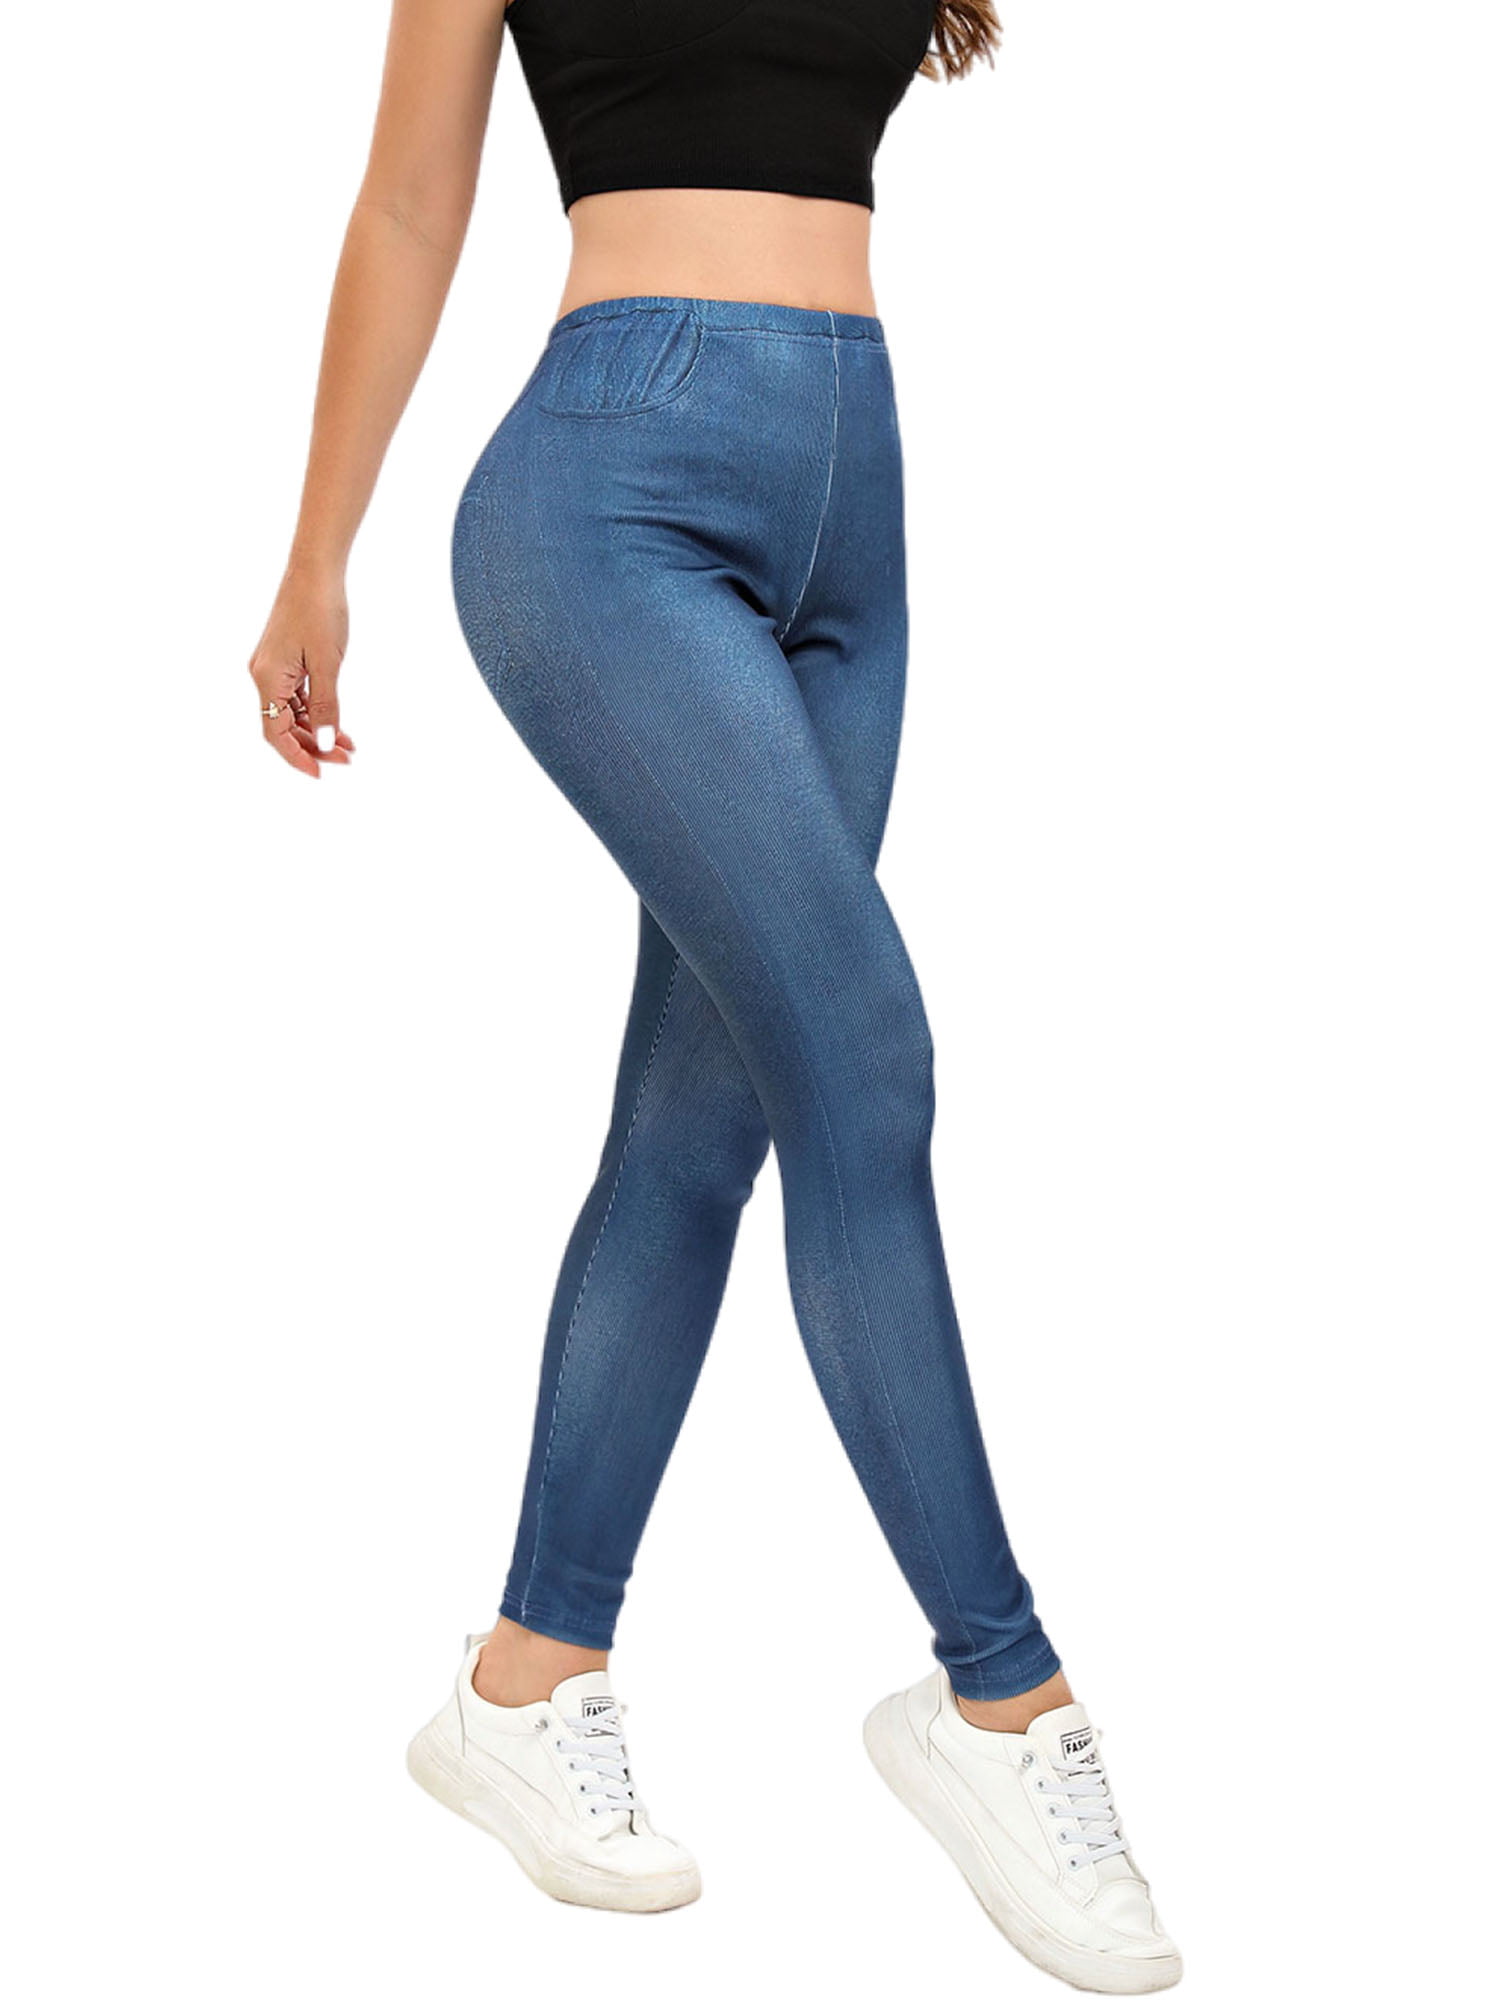 Frontwalk Jean Leggings for Women Printed Denim High Waisted Yoga Pants  Stretch Jean Look Jeggings Tights Blue-B XS 